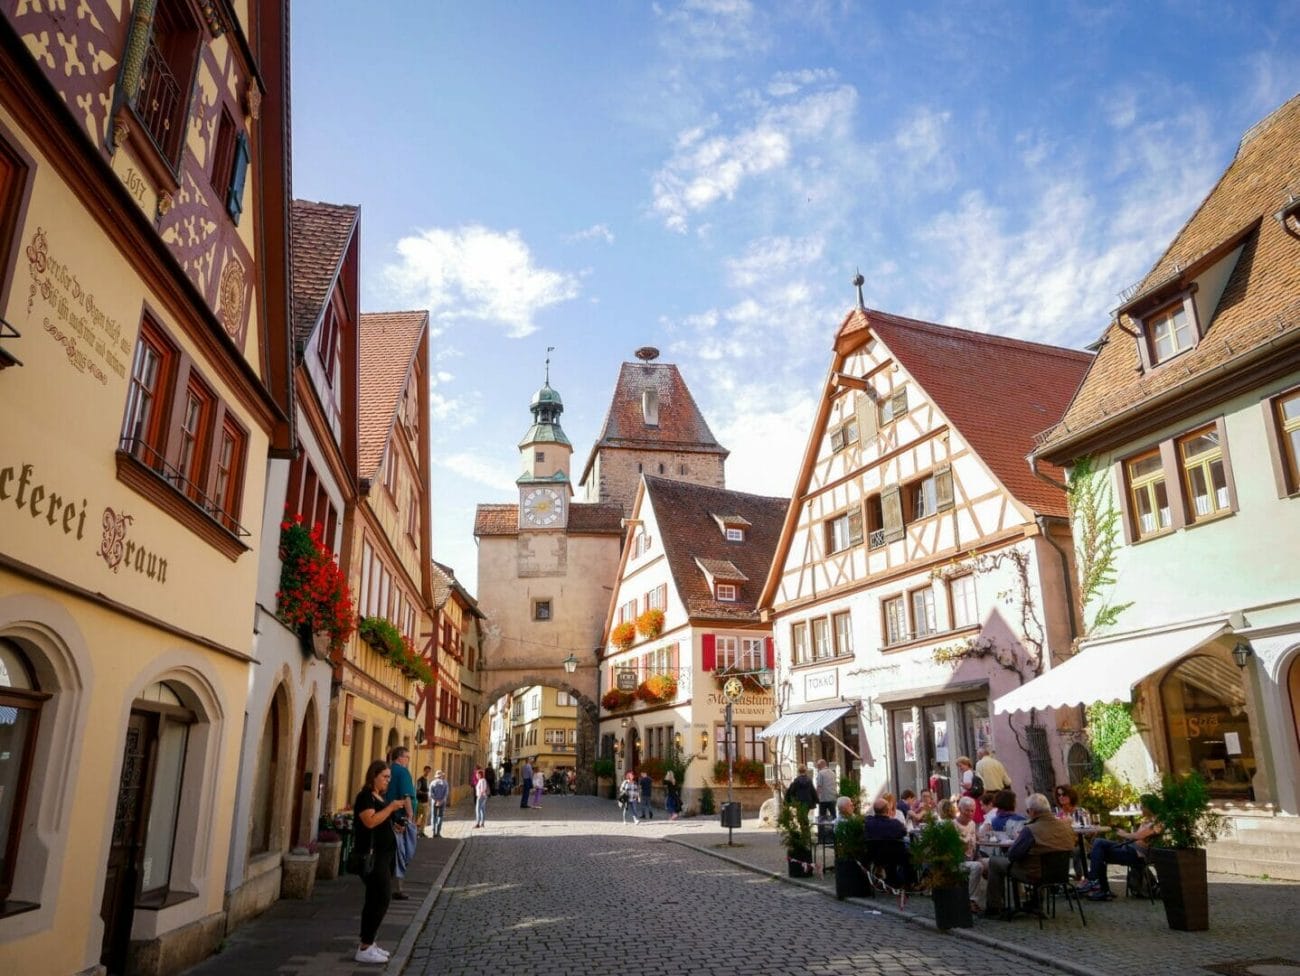 photo of buildings during daytime - Top Things to do in Rothenburg Ob Der Tauber